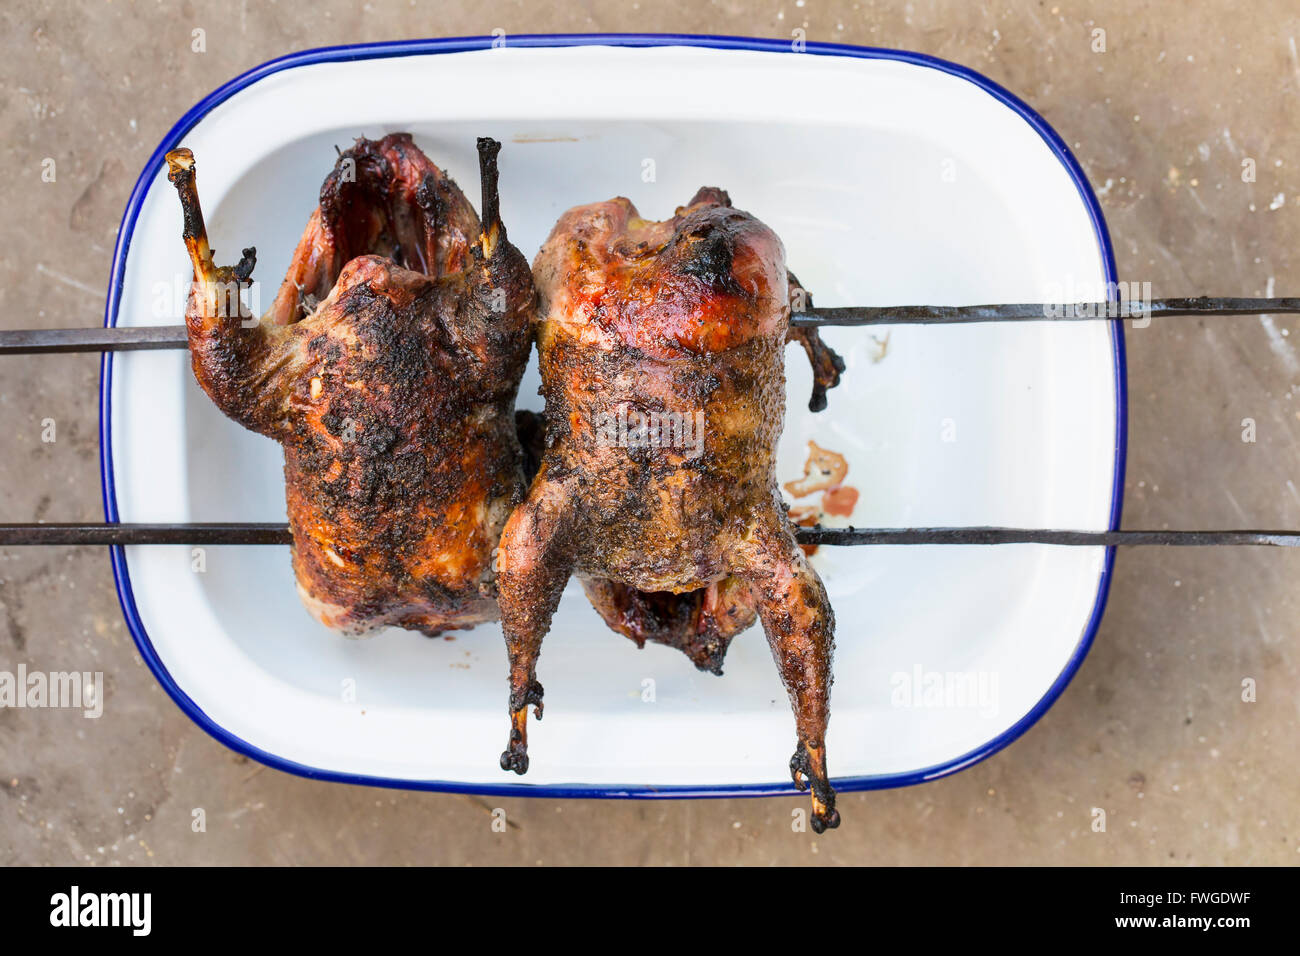 Two small roasted cooked game birds on skewers. Stock Photo